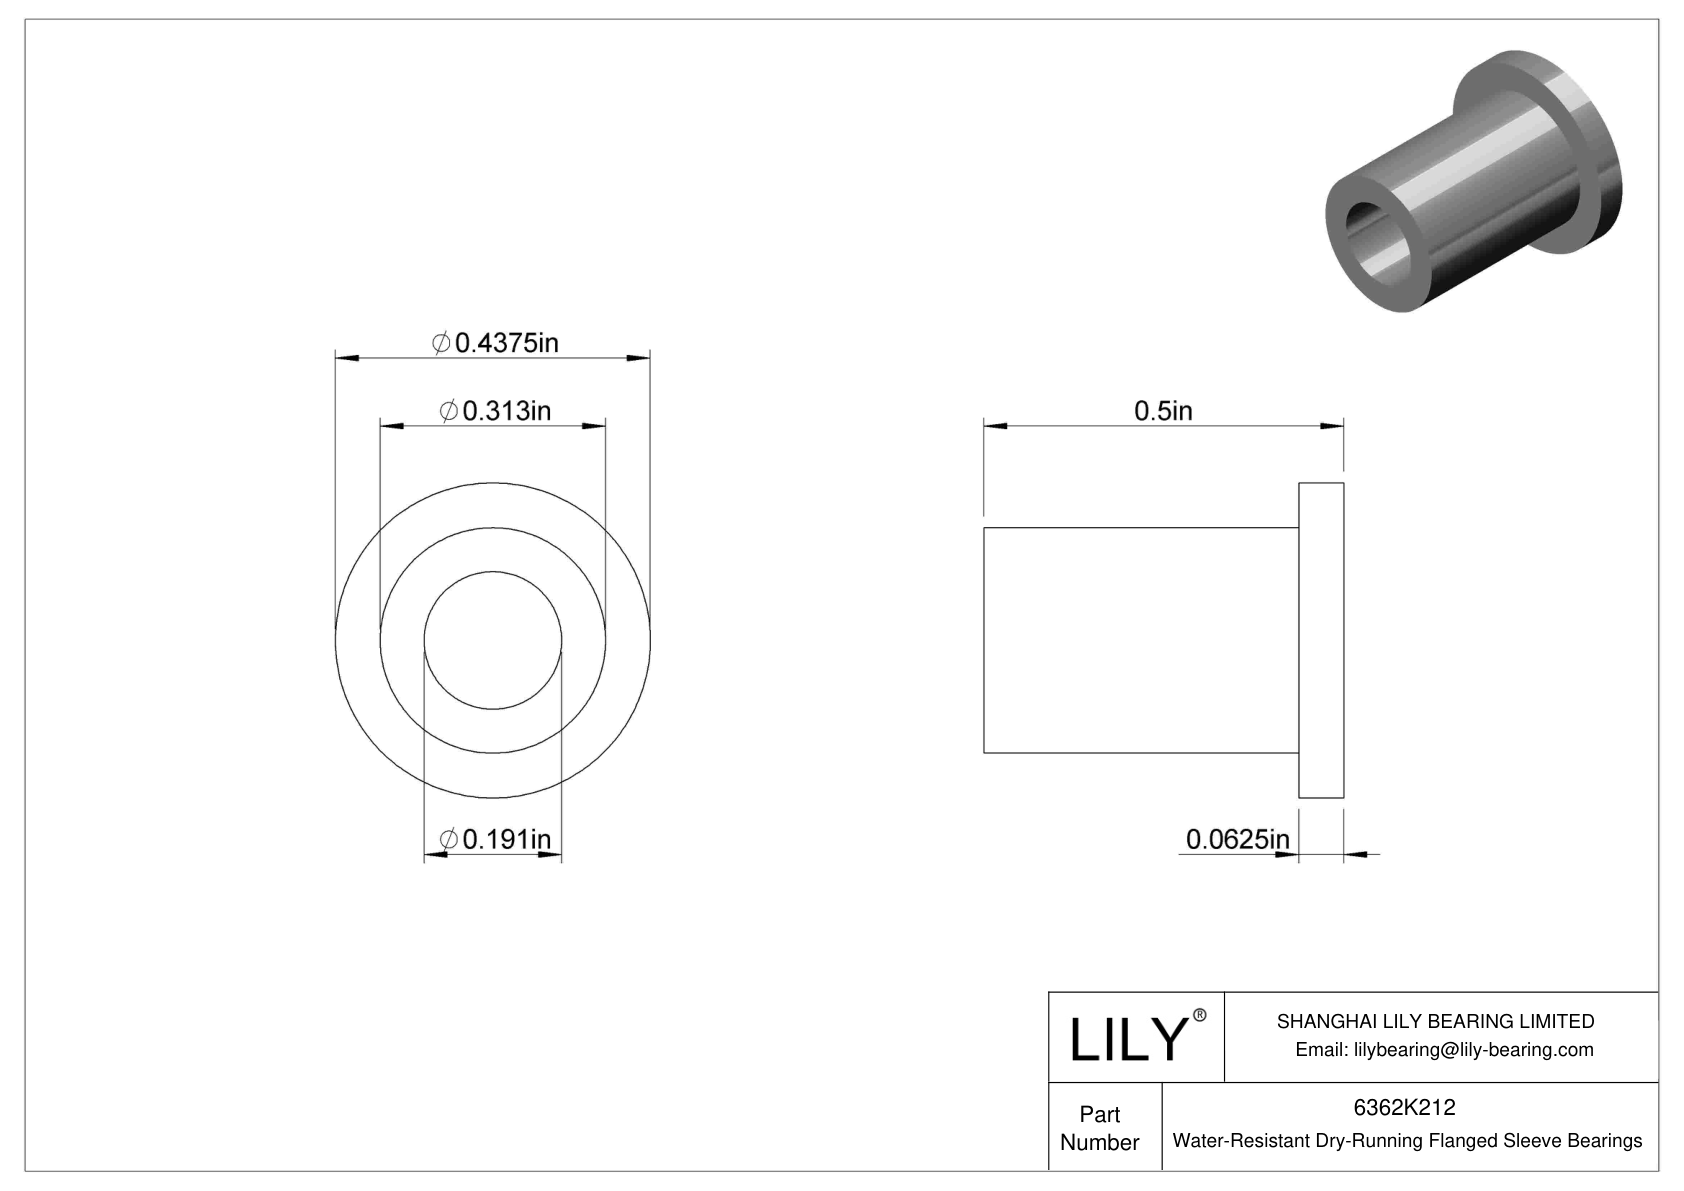 GDGCKCBC Water-Resistant Dry-Running Flanged Sleeve Bearings cad drawing